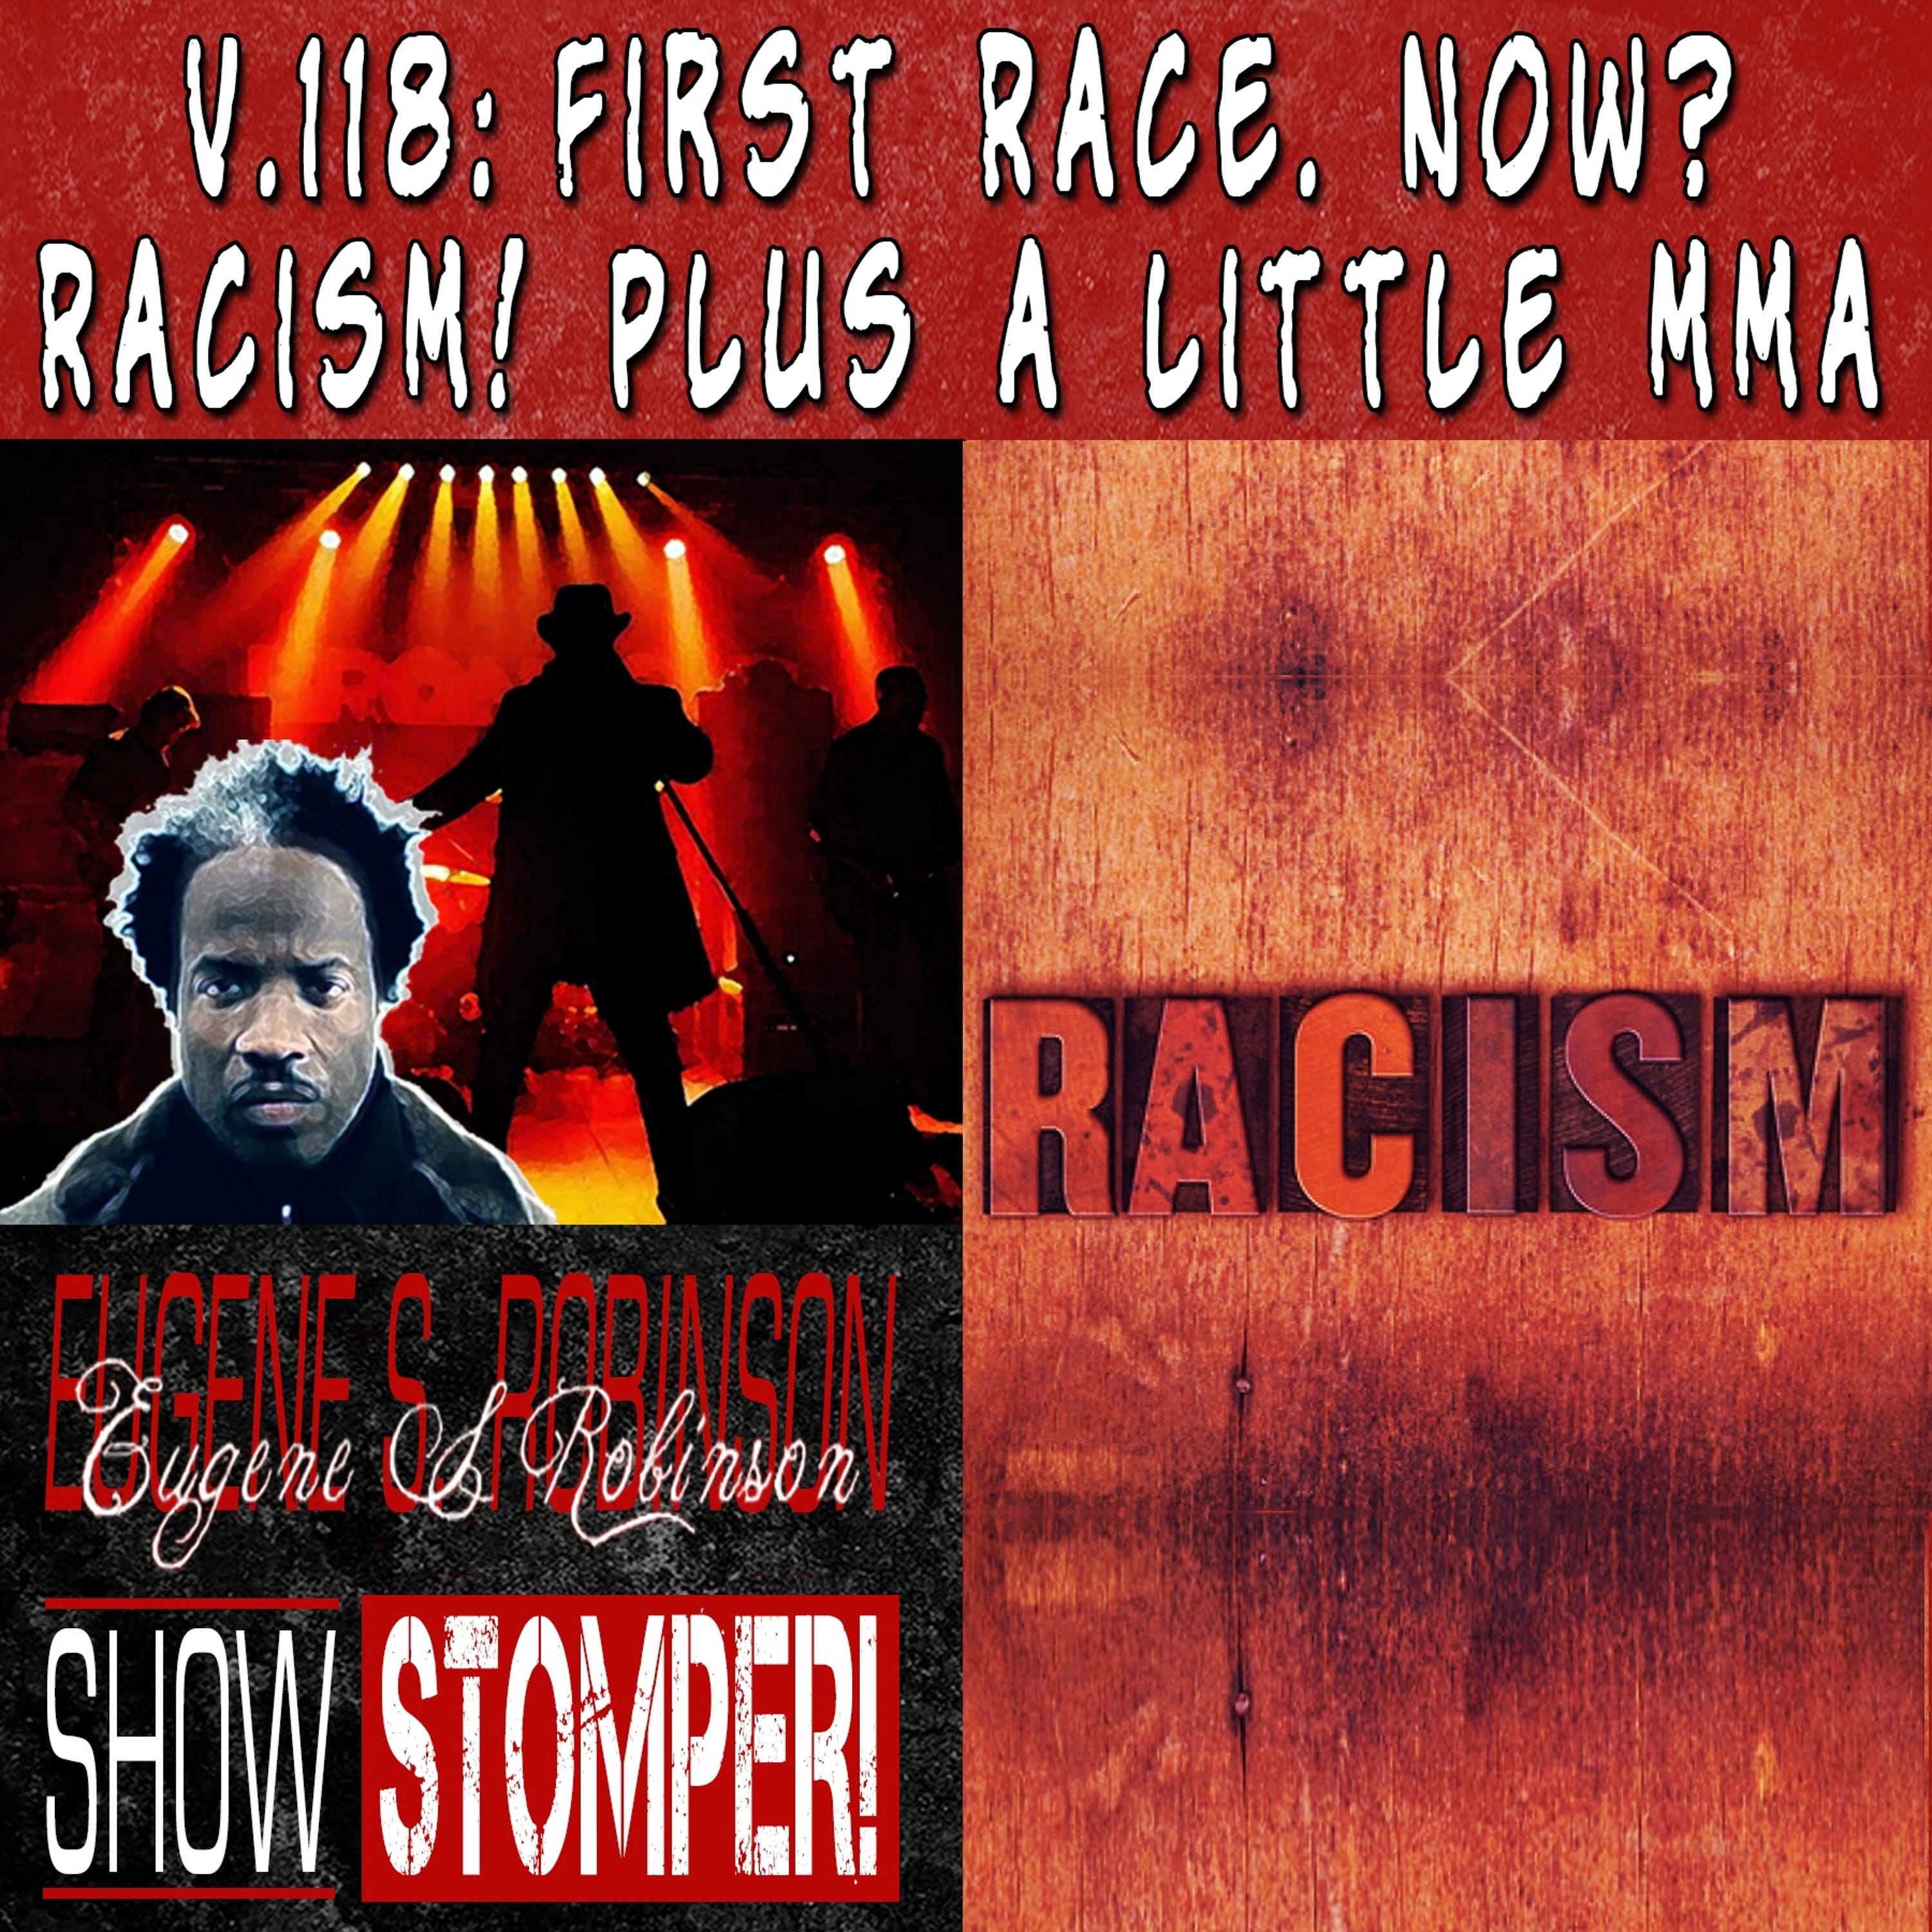 V.118 First Race. Now Racism! Plus A Little MMA On The Eugene S. Robinson Show Stomper!